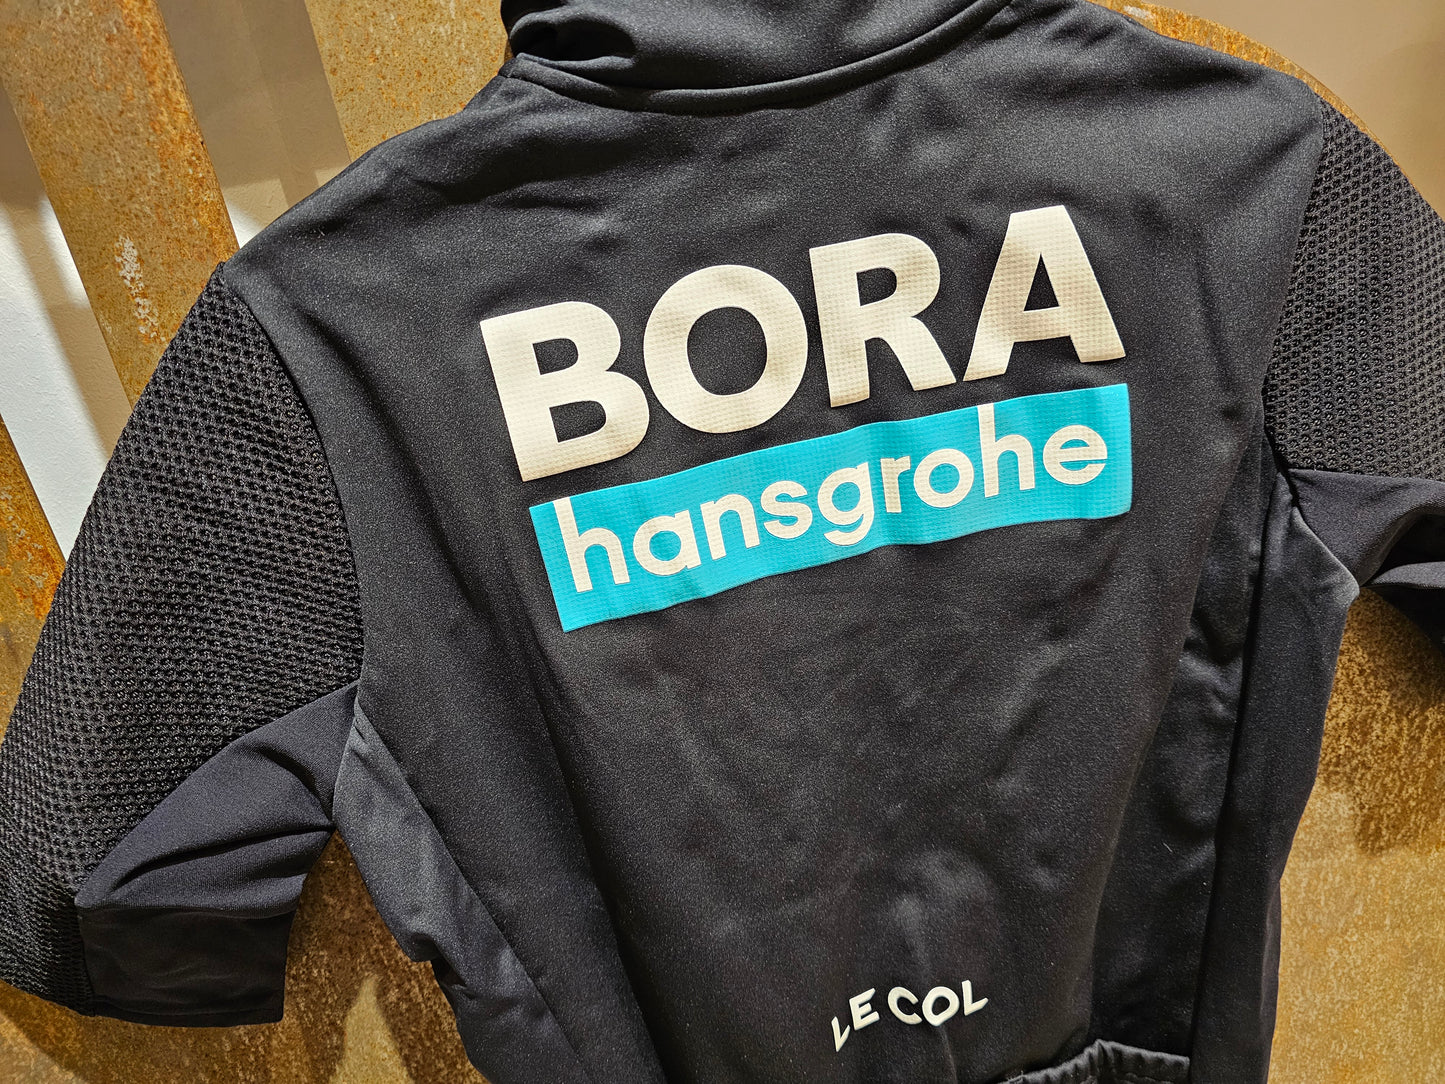 LE COL BORA HANSGROHE SS THERMAL JERSEY - SHORT SLEEVE JERSEY 2023